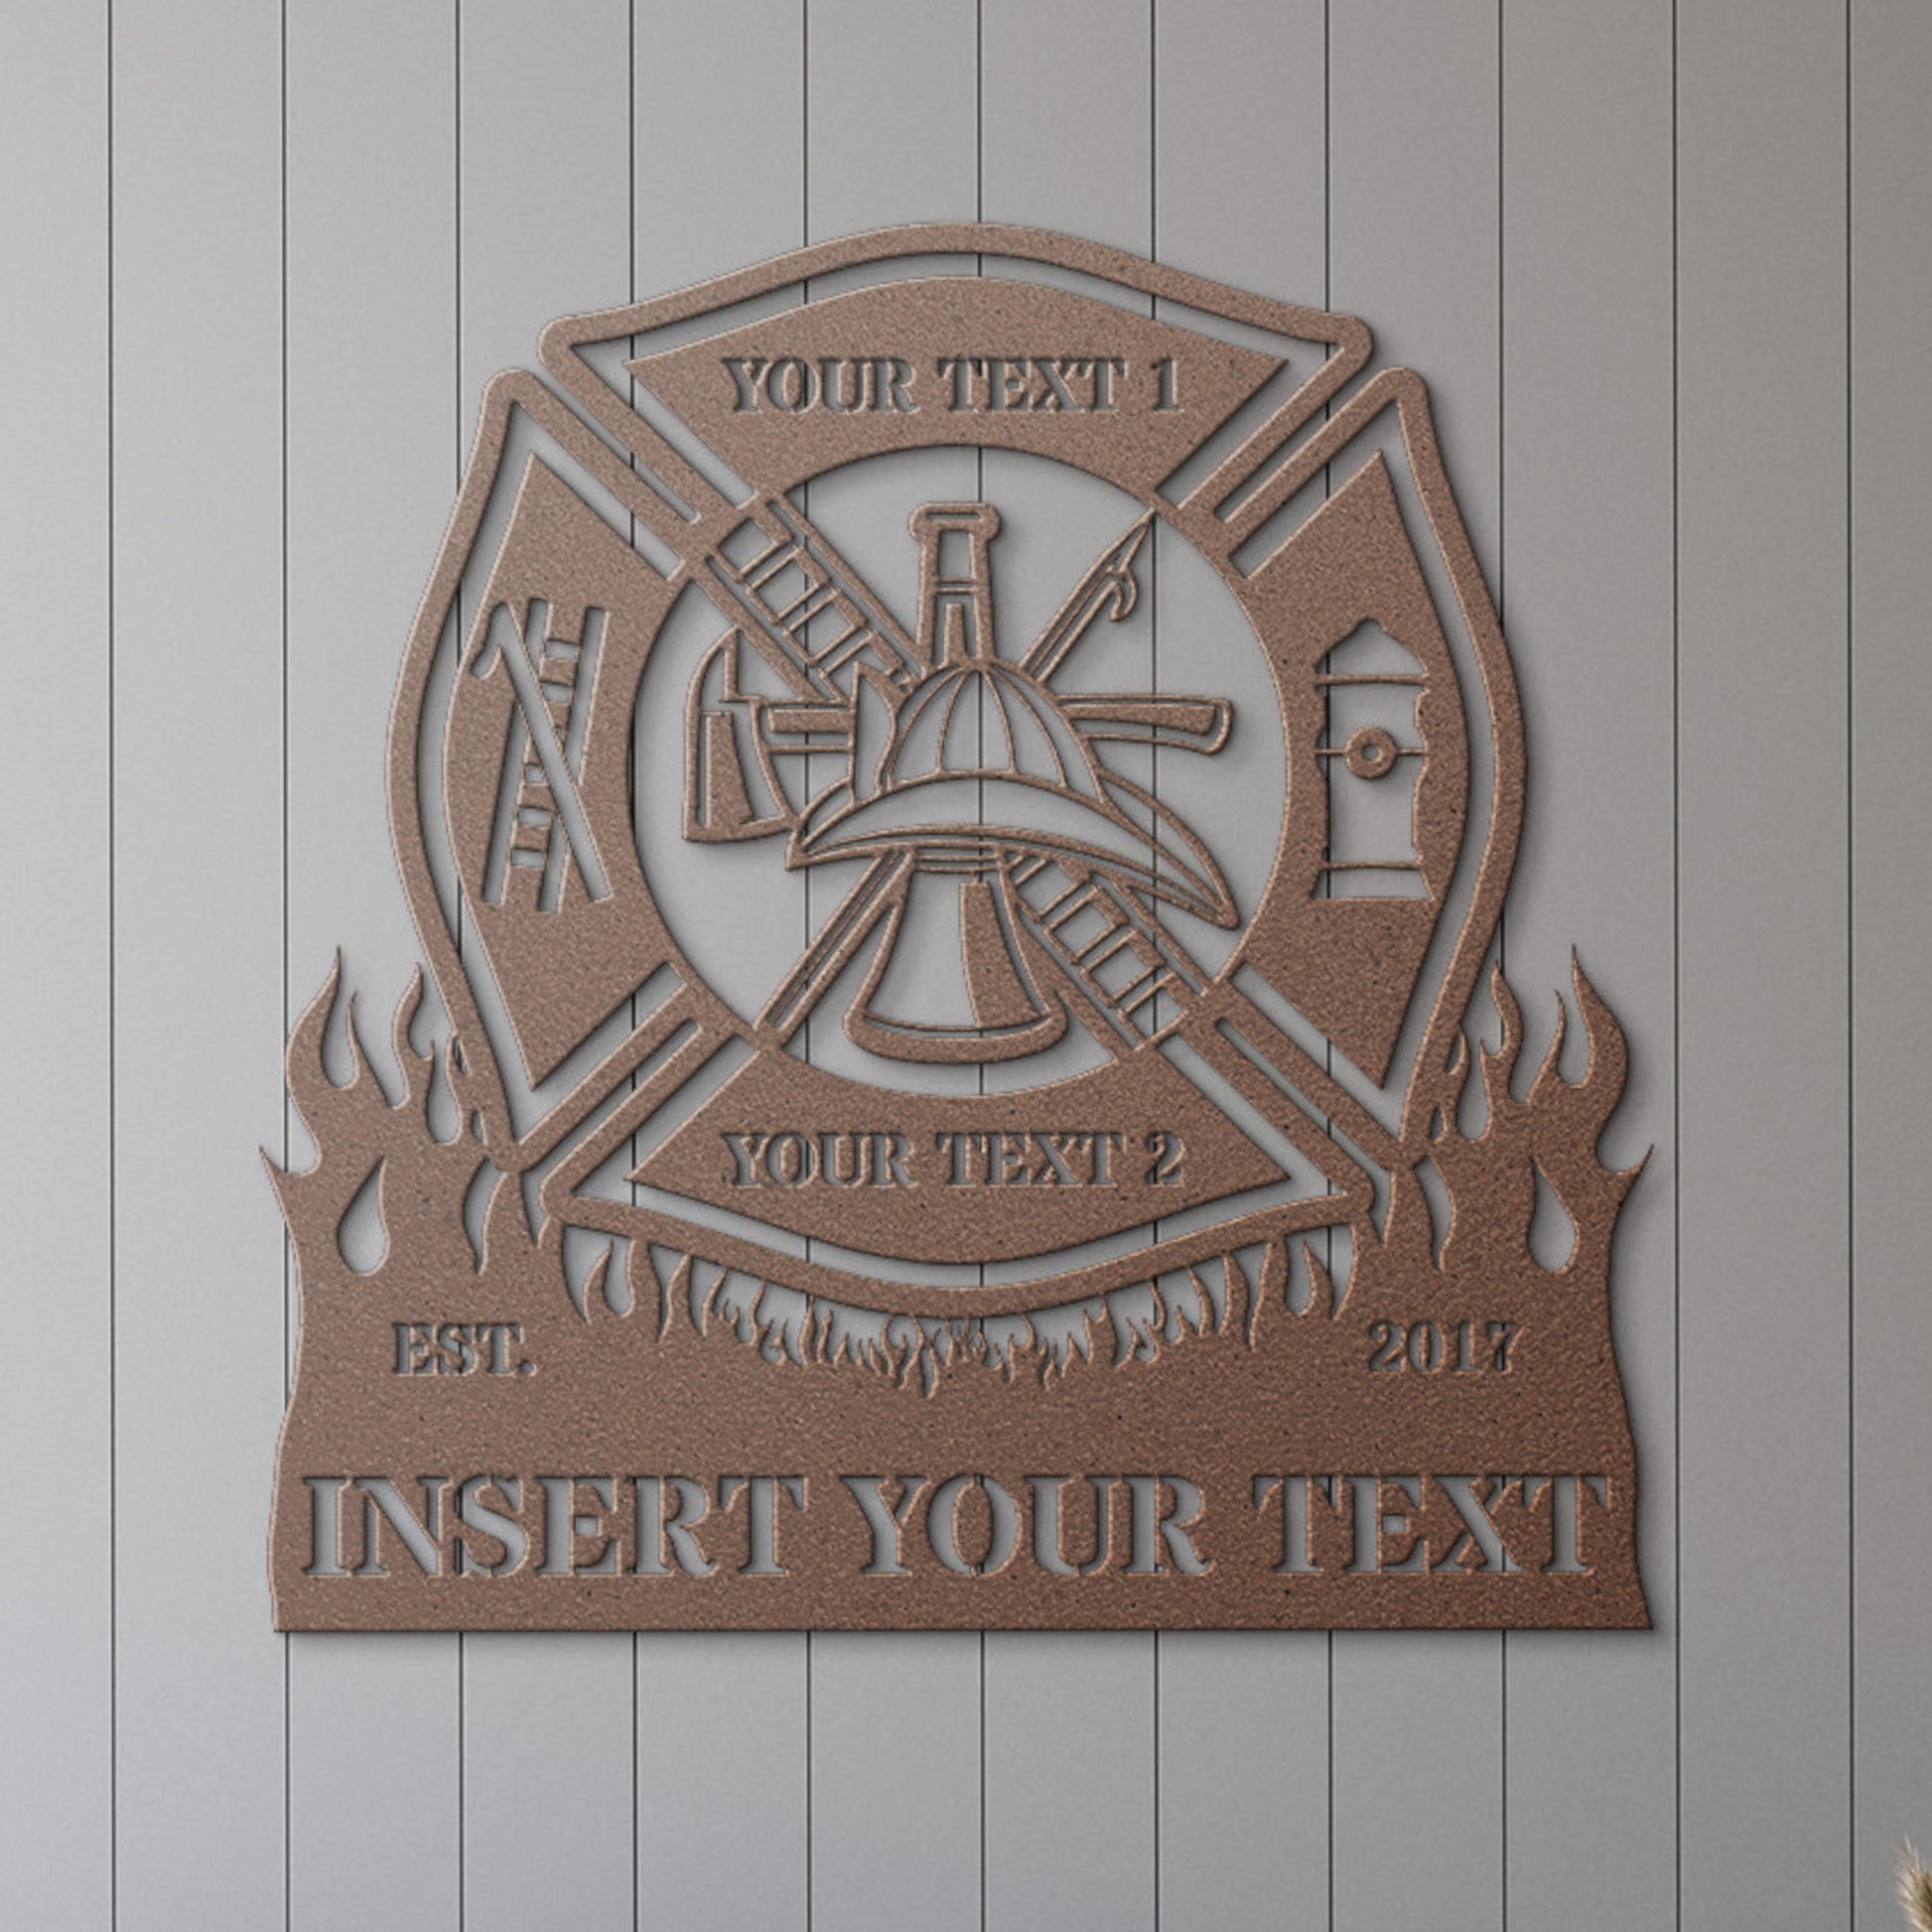 Firefighter Personalized Metal Sign Gift. Custom Fire Department Maltese Cross Wall Decor. Customized Name Sign For US Fireman. Fire Chief